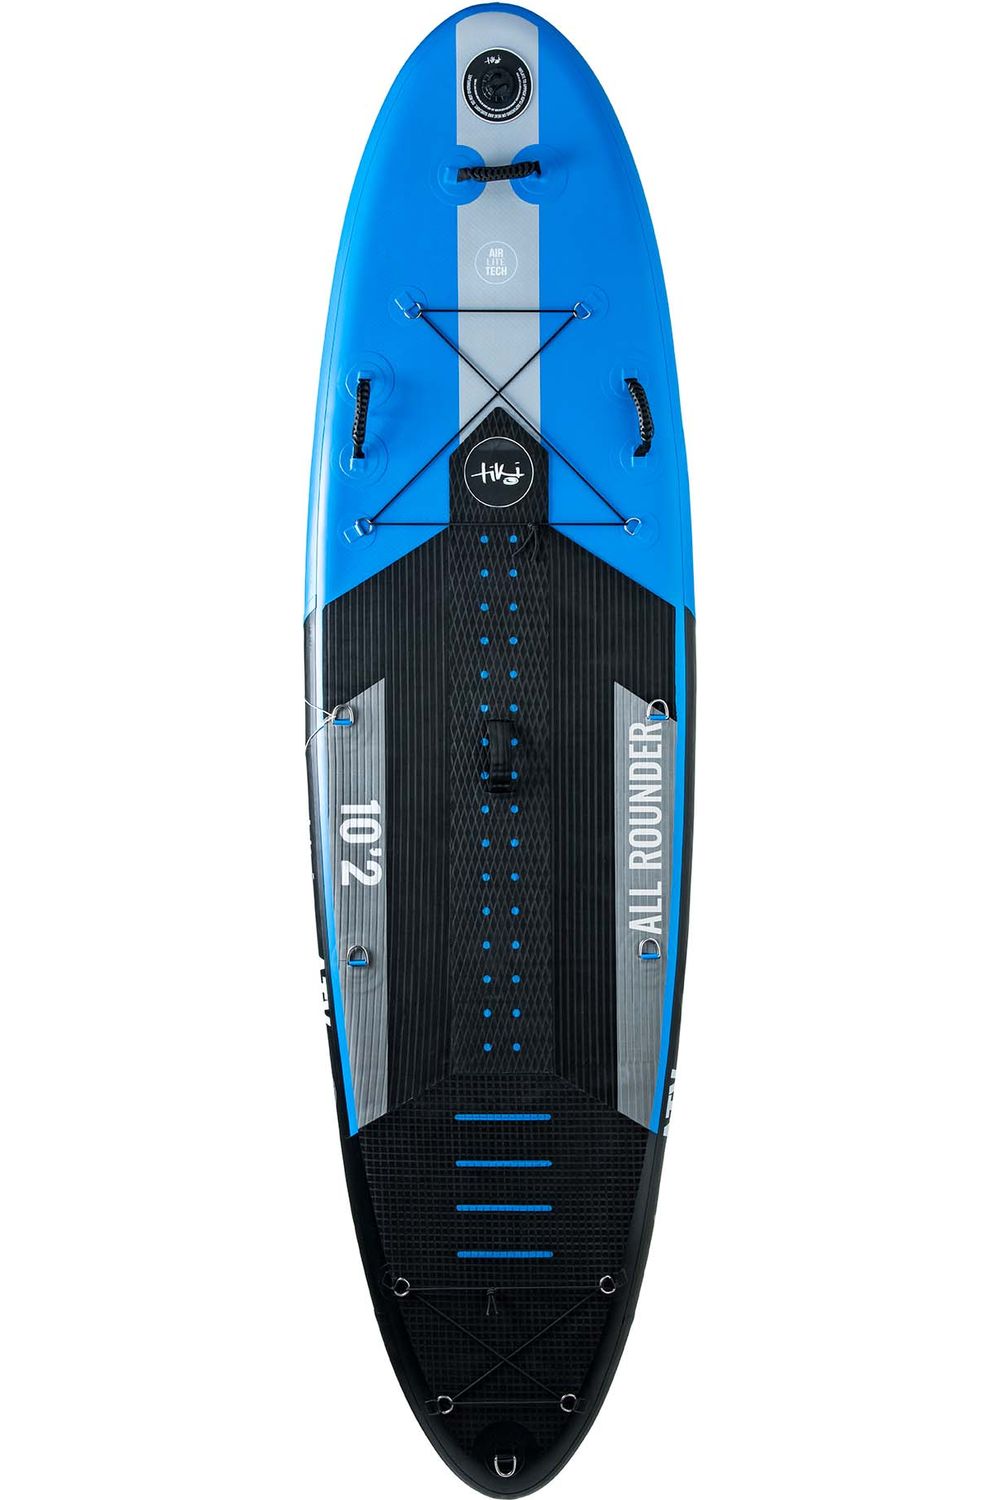 Tiki 10'2 All Rounder Inflatable SUP + Accessories Pack with Paddle